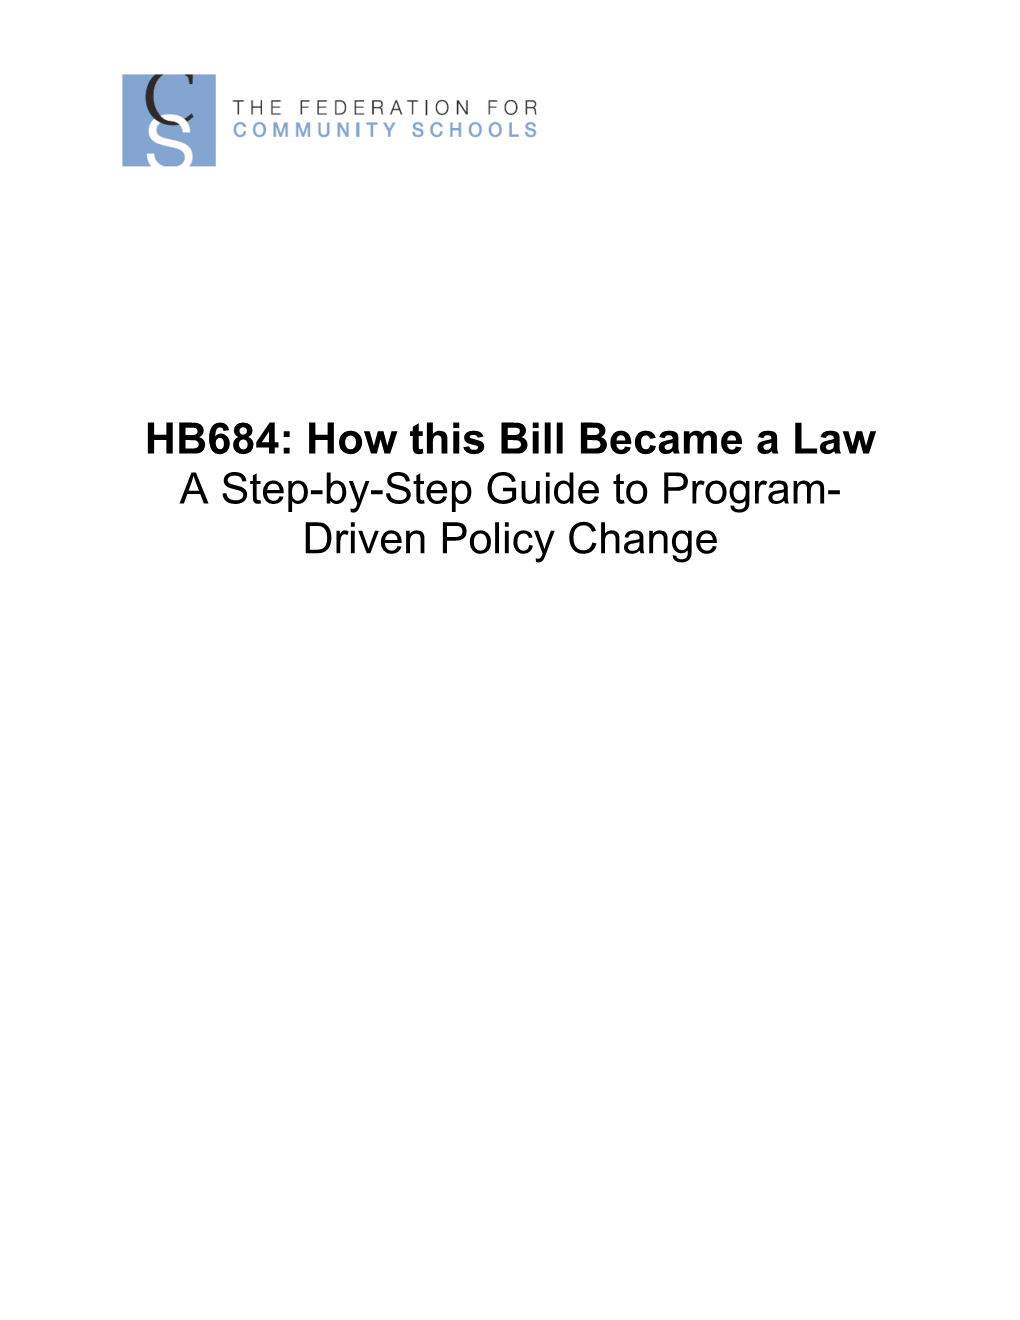 HB684: How This Bill Became a Law